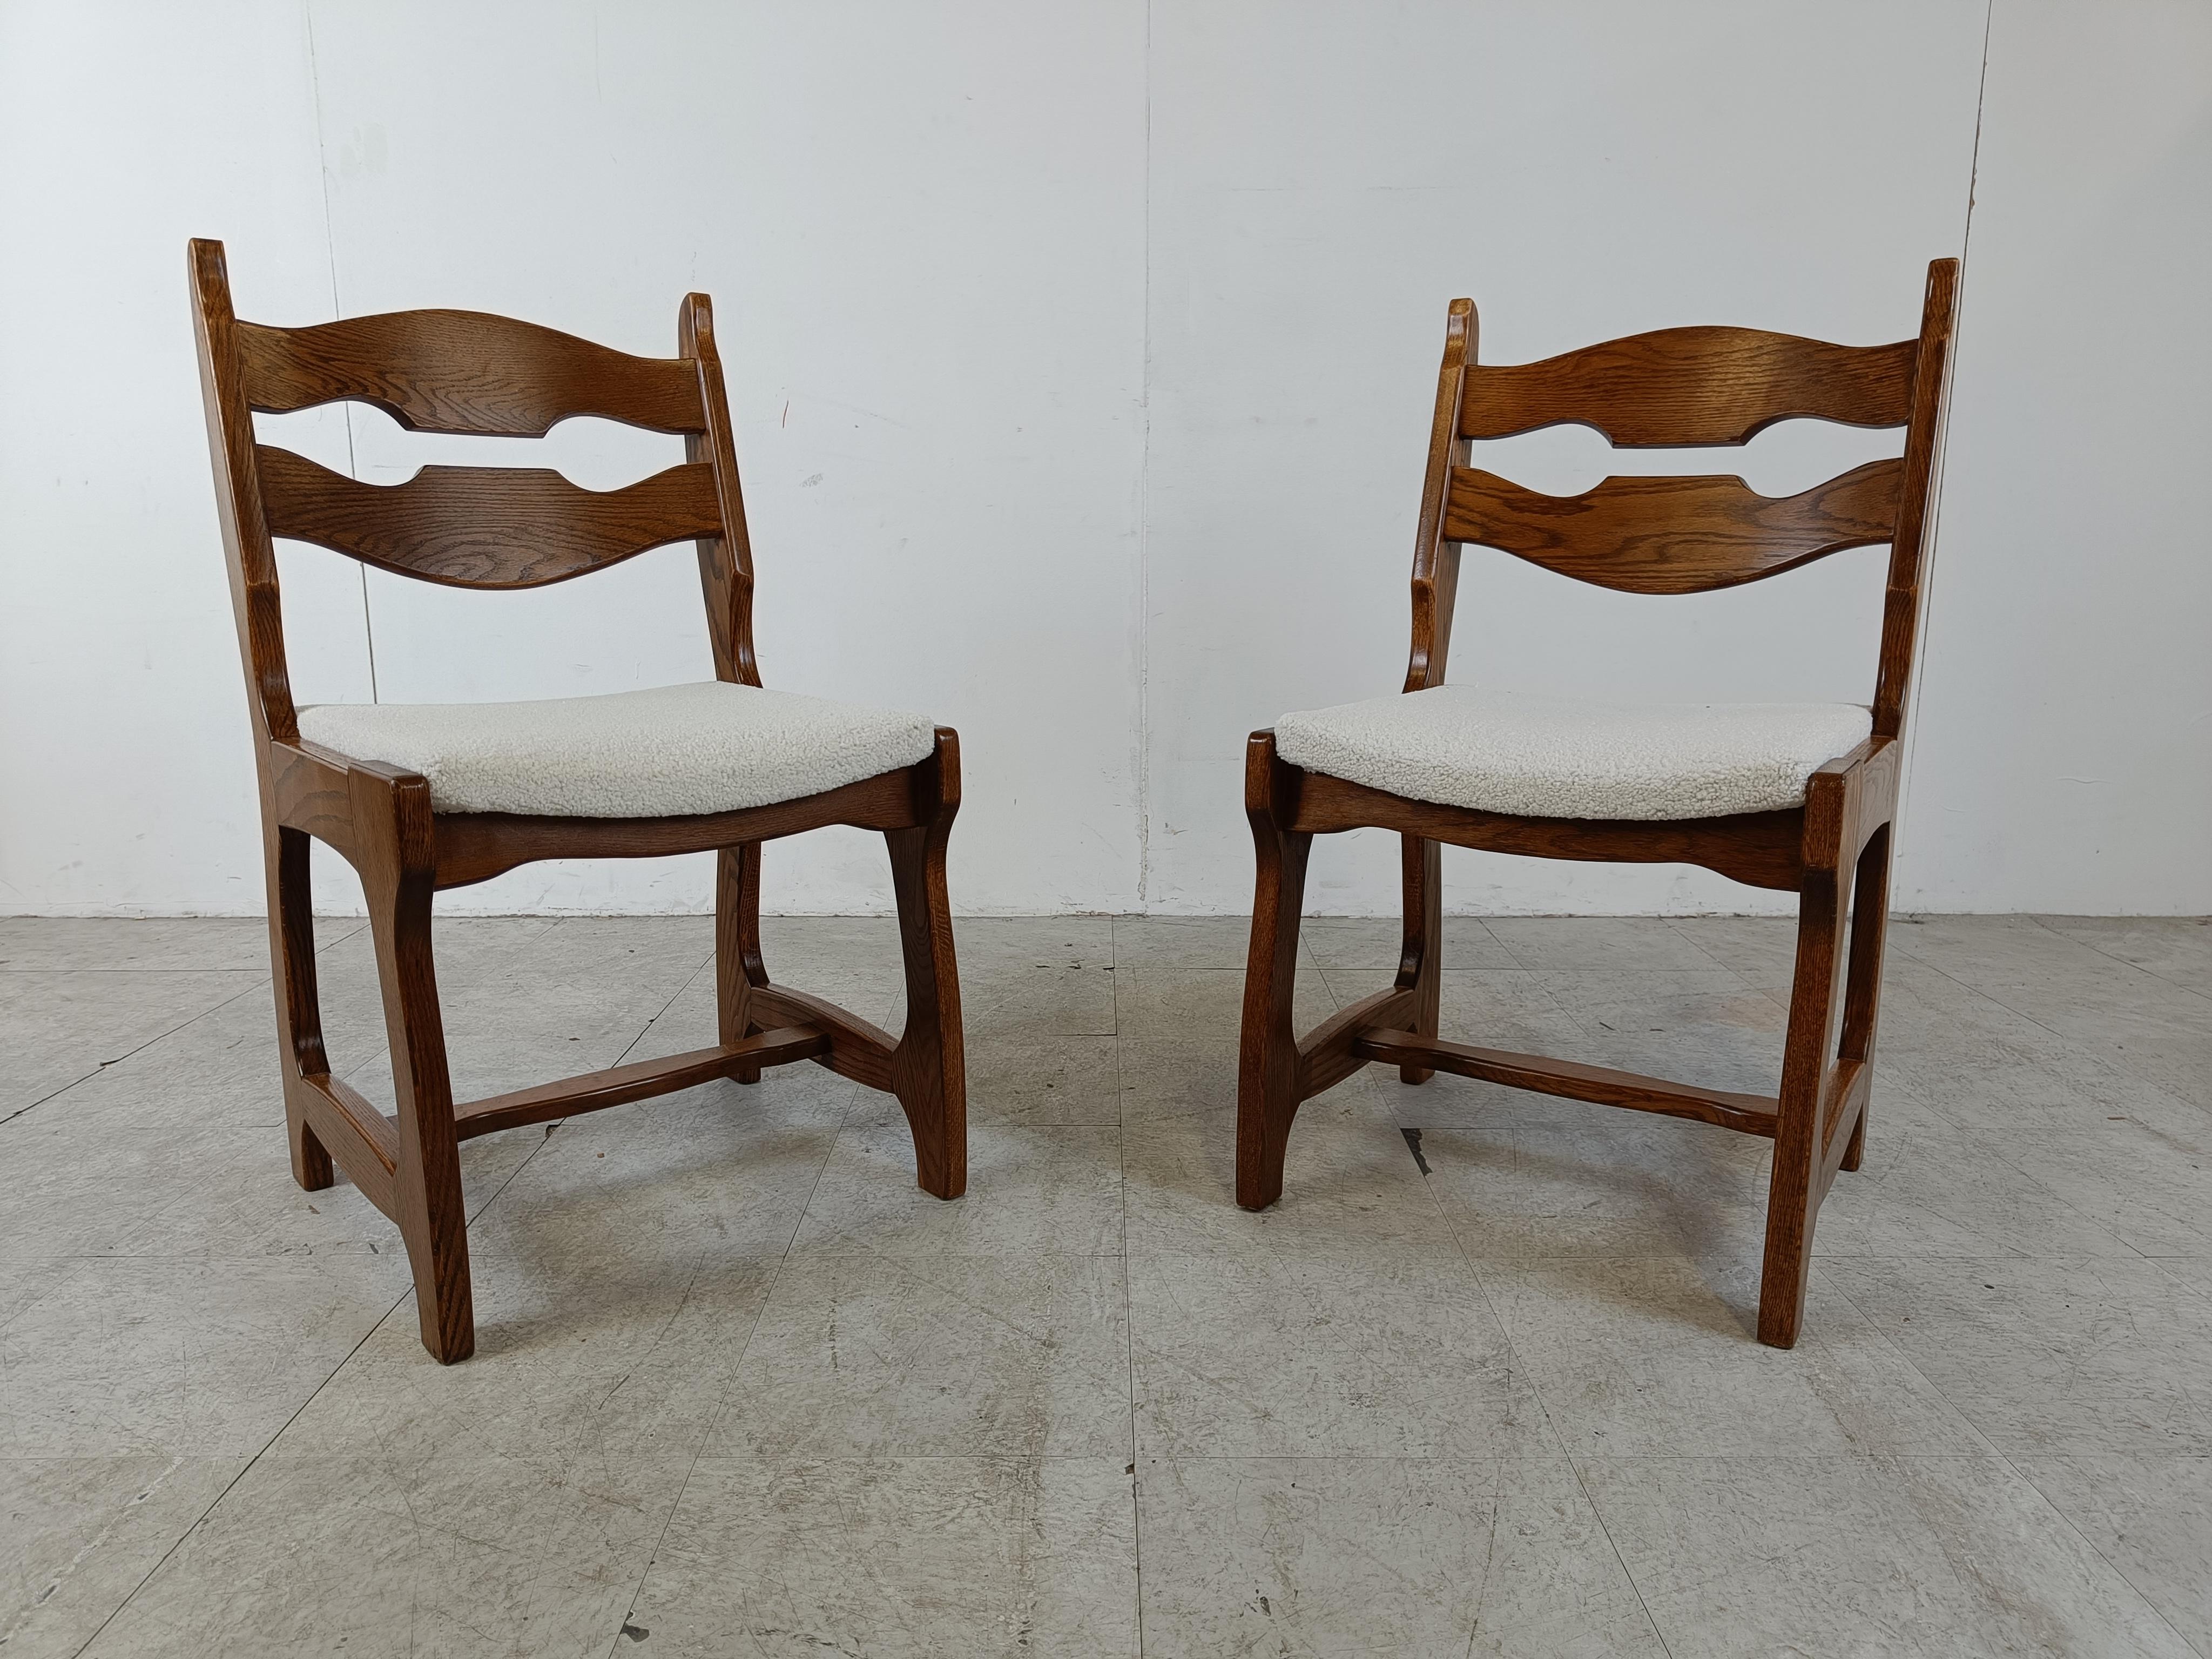 Vintage brutalist dining chairs, set of 6 - 1960s  2